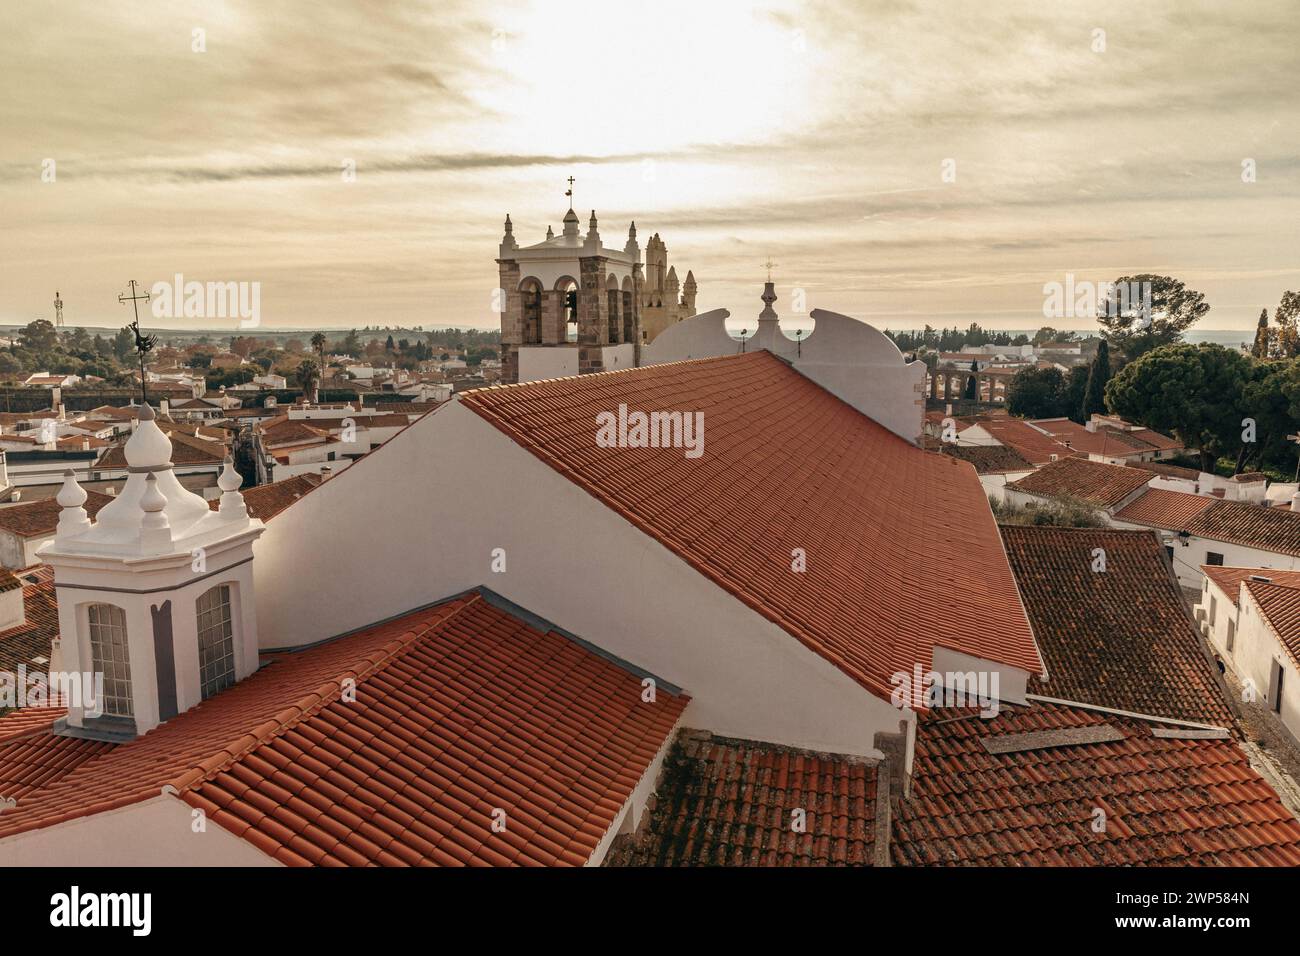 Portugal Cultural travel, city trips and interesting sights View of the rooftops of the city Serpa and the Church of Santa Maria in Alentejo Stock Photo